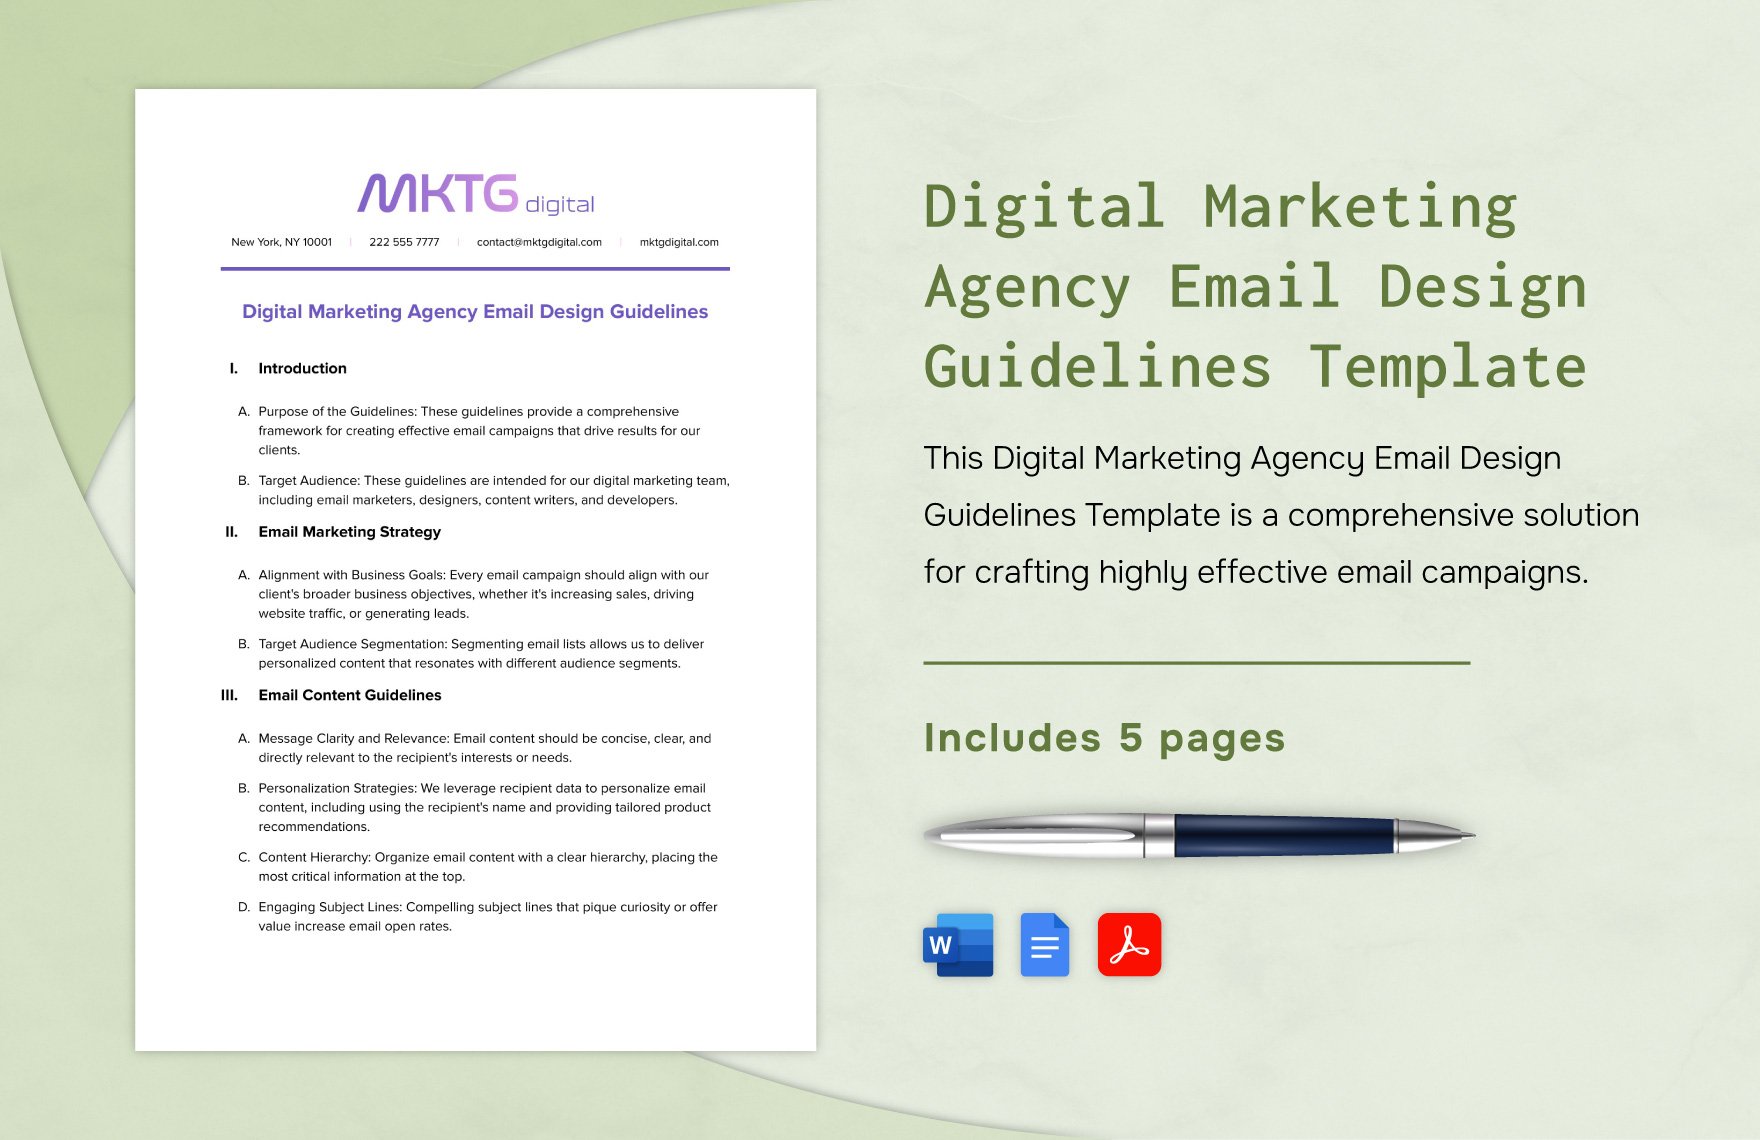 Digital Marketing Agency Email Design Guidelines Template